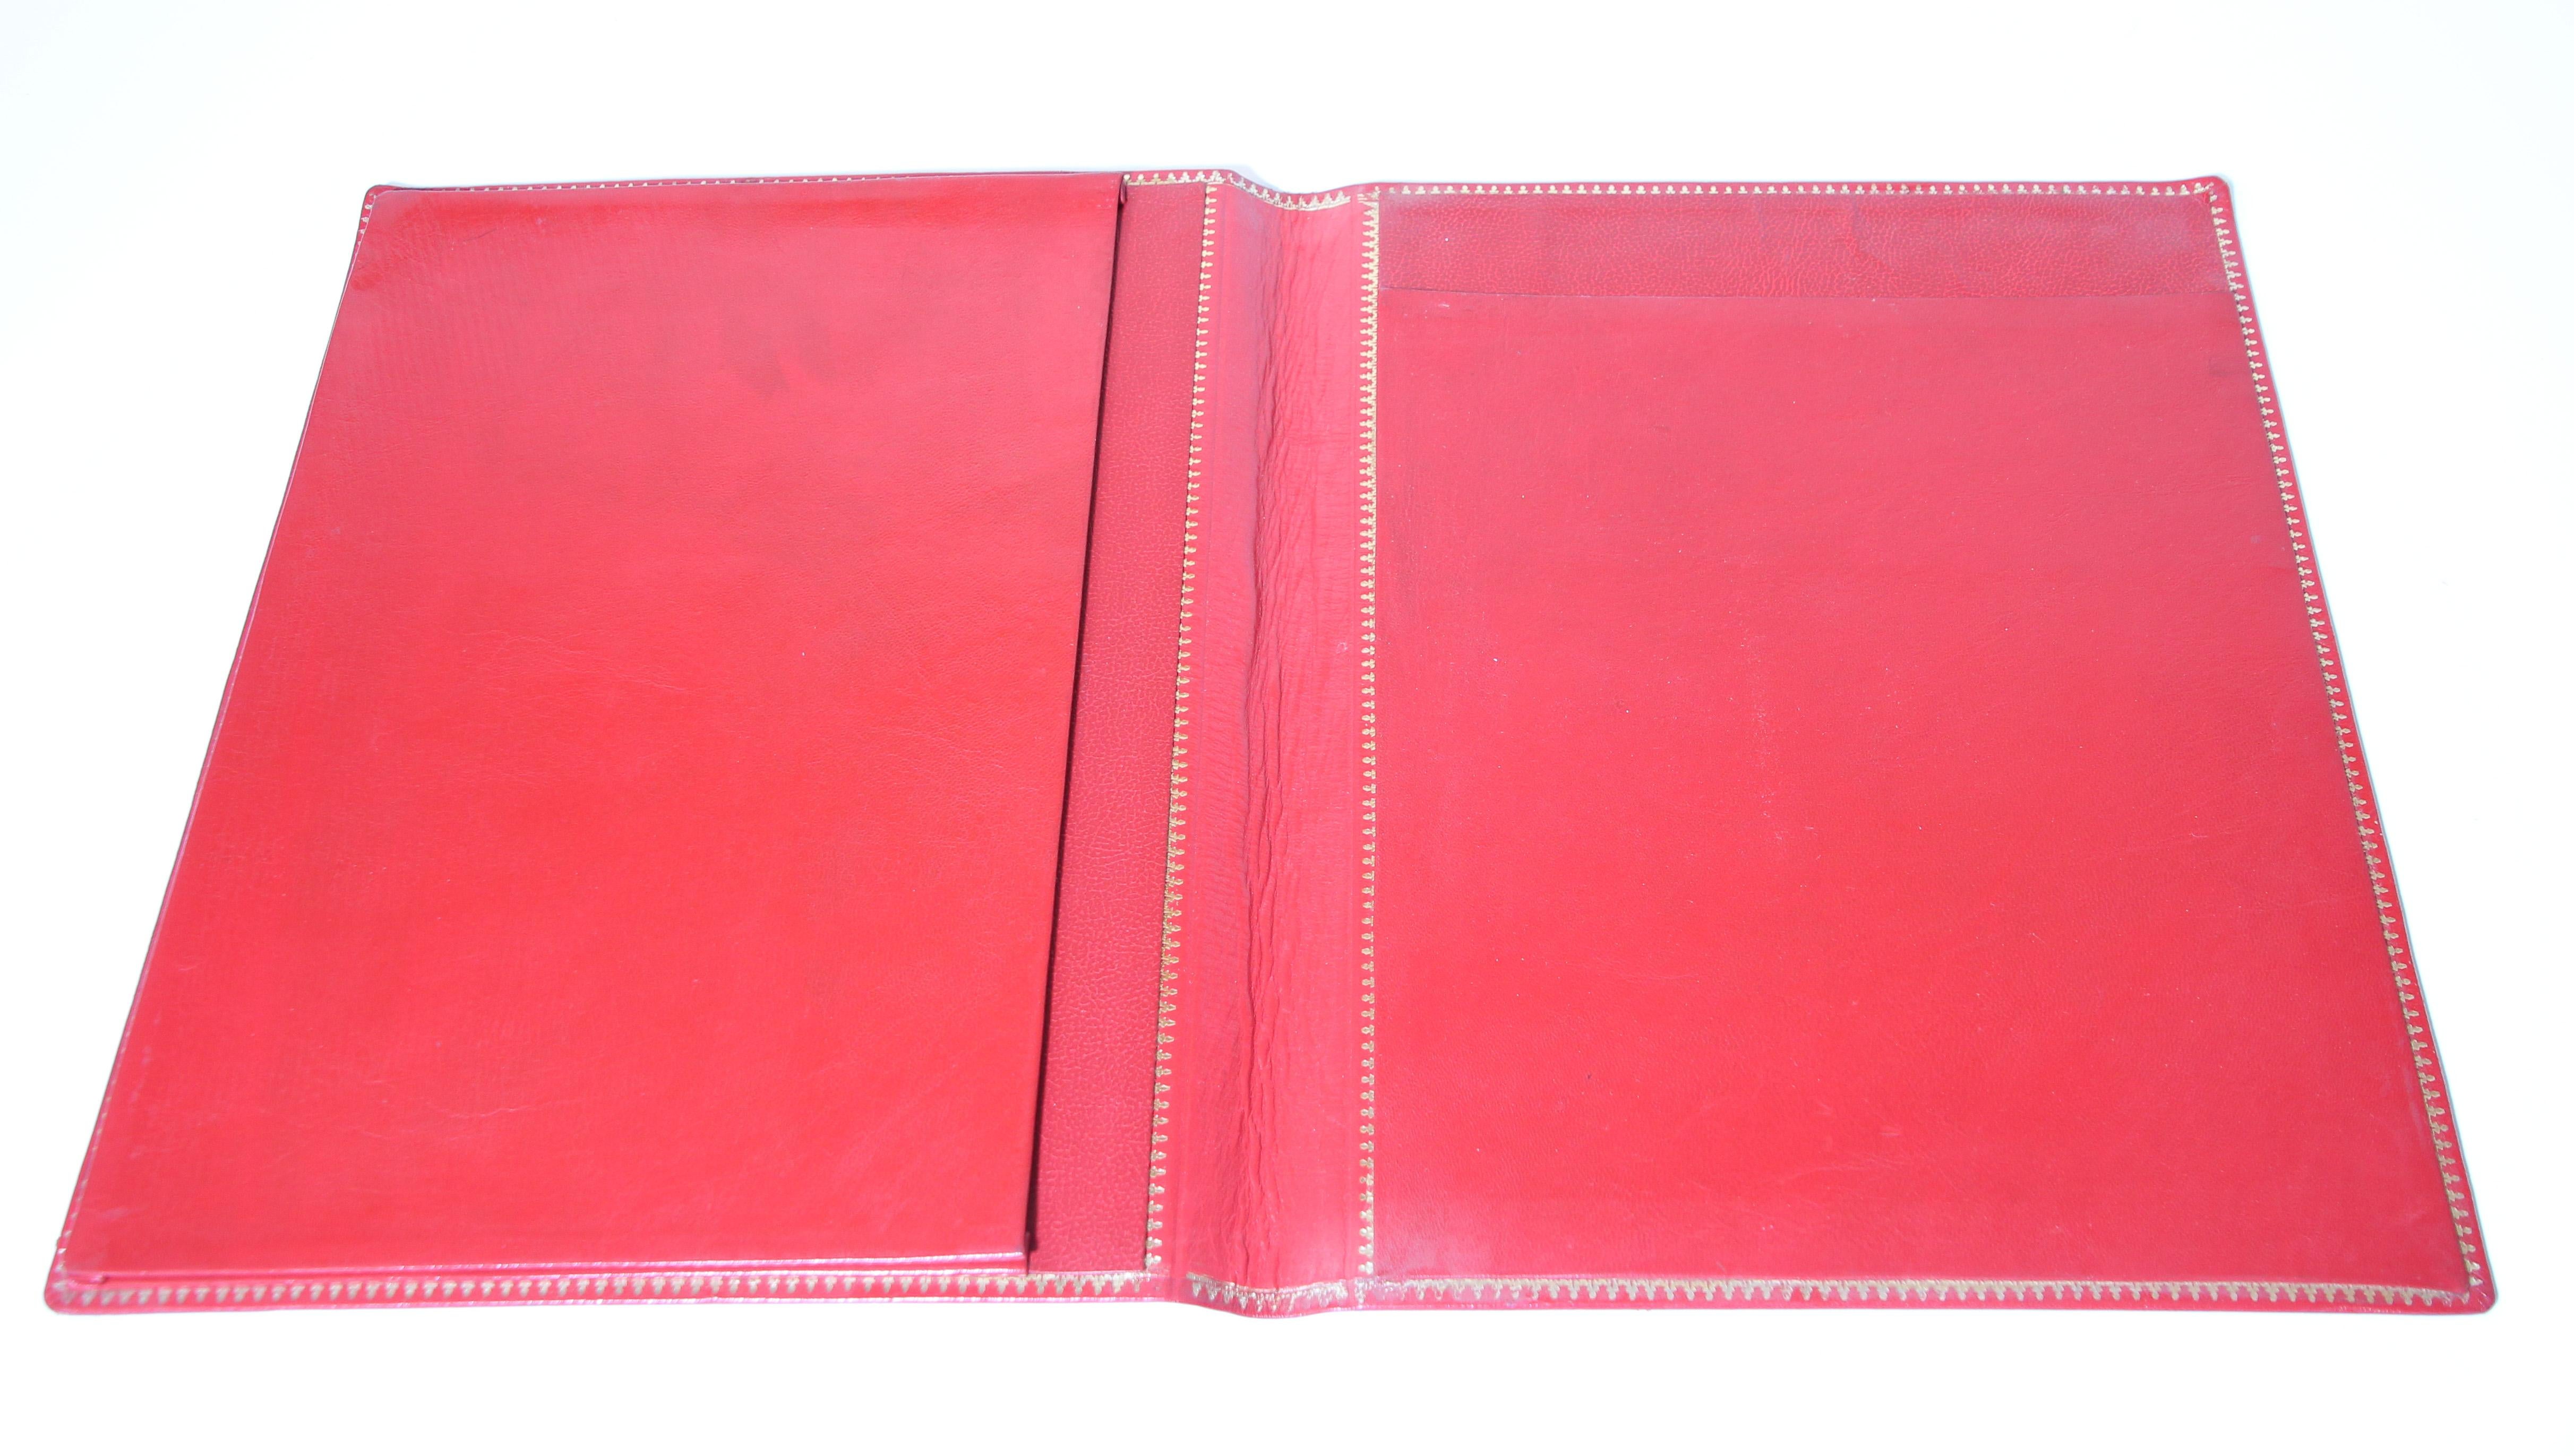 Late 20th Century Vintage Moroccan Embossed Leather Padfolio For Sale